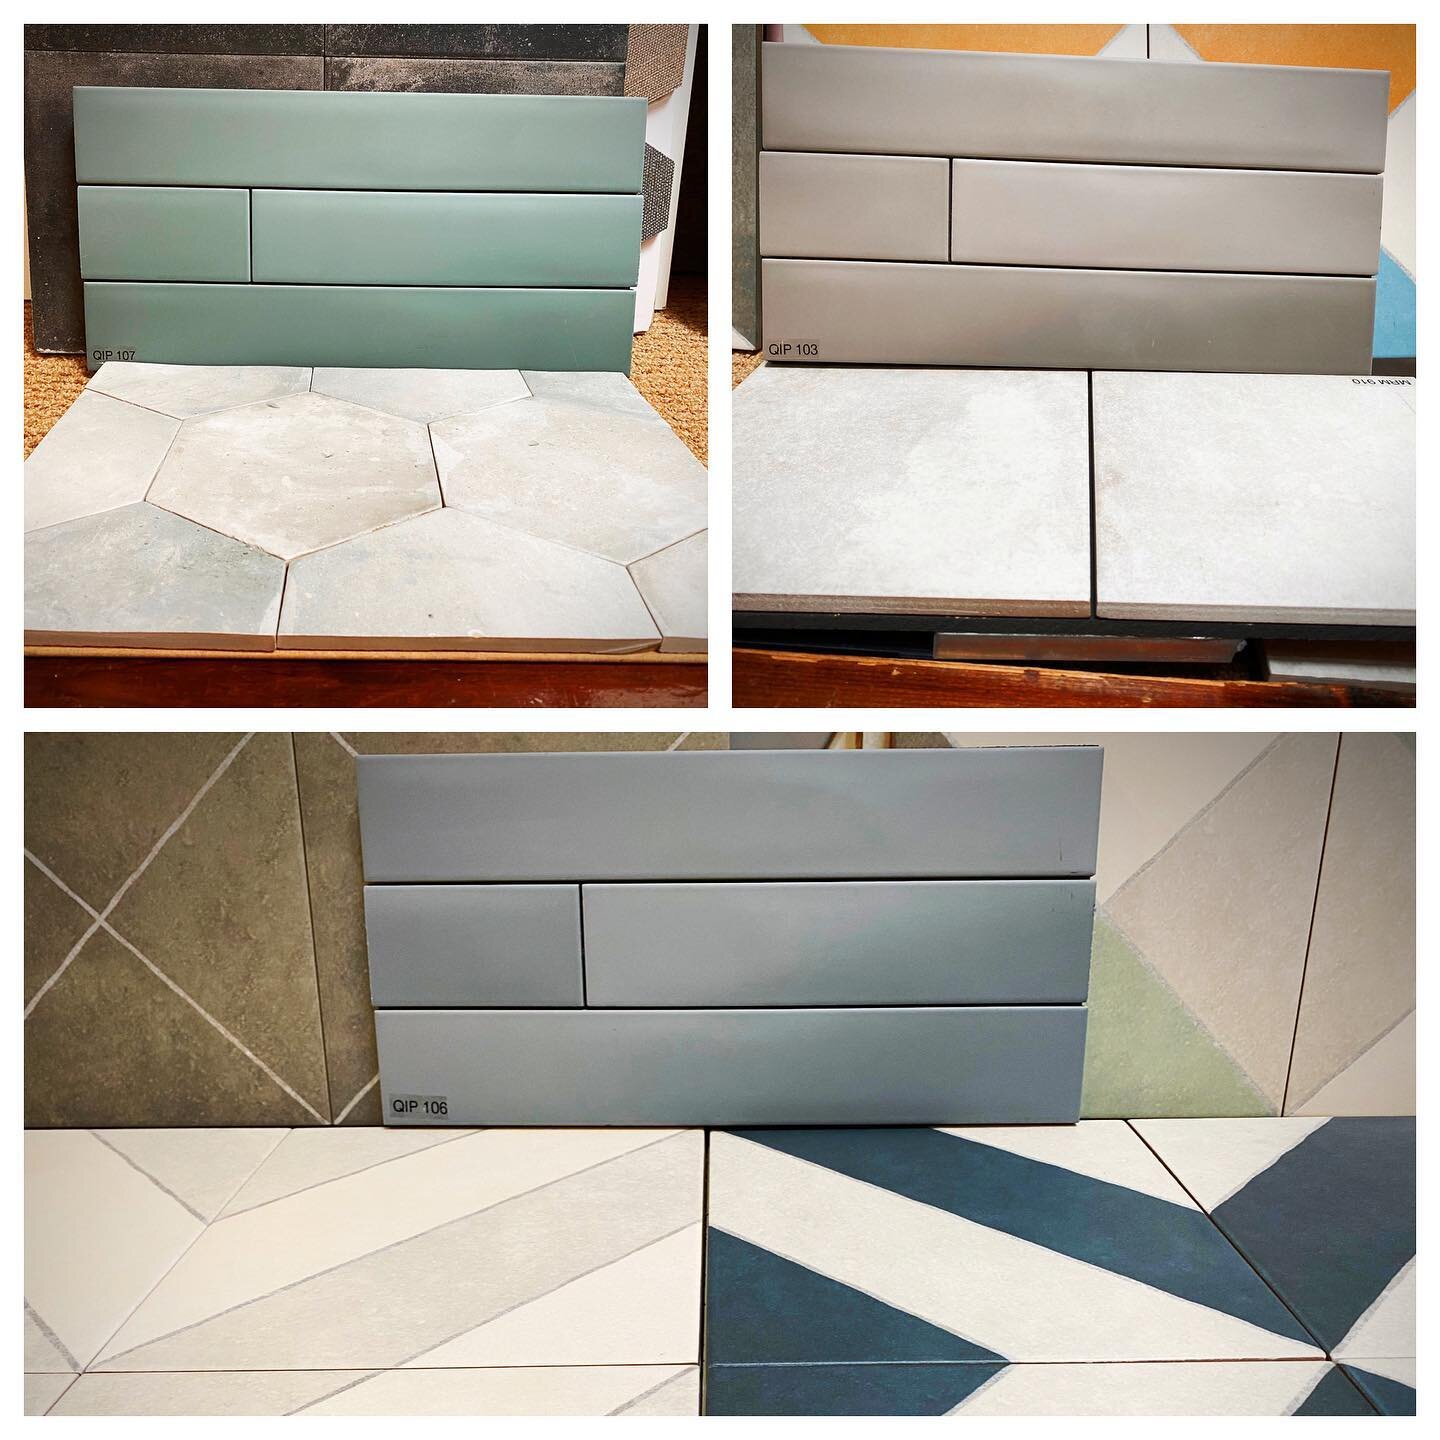 When everything else is at a standstill, our business is moving forward thank God. People always need homes so we&rsquo;re considered an essential business🙌🏻 We&rsquo;re choosing tile for one of our projects today, which ones do you like? 🤔
.
.
.
